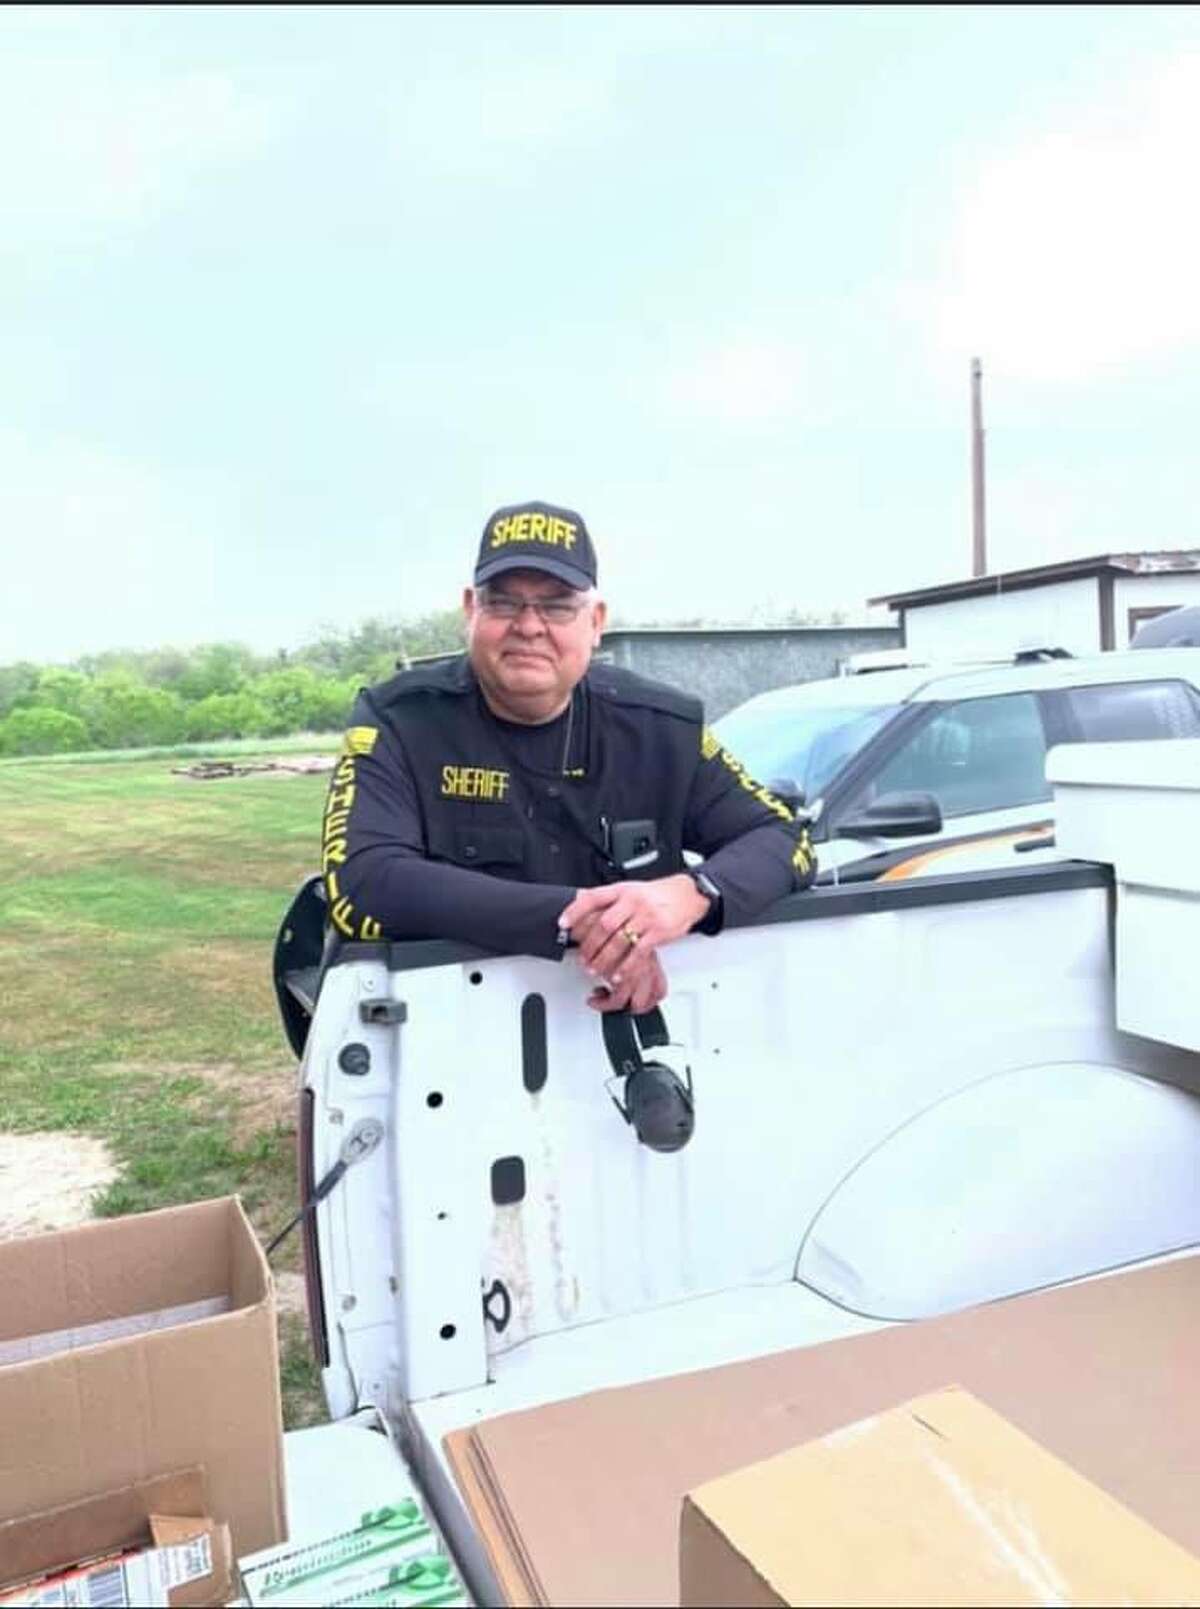 Gonzales County Sheriff Robert Ynclan died Sunday of COVID-19, according to facebook post by the sheriff's office. He was 63.